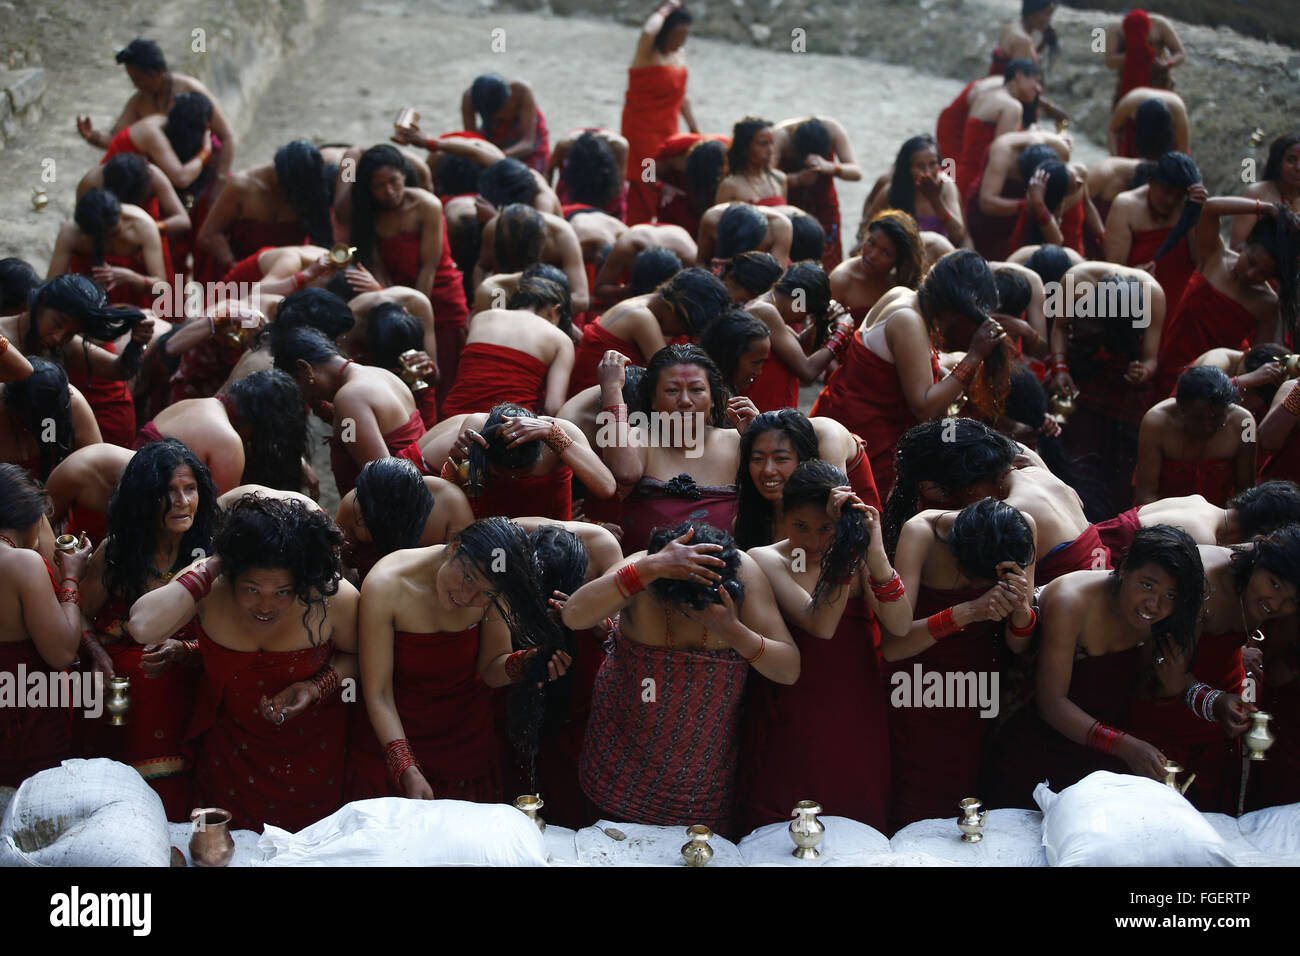 Bhaktapur, Nepal. 19th Feb, 2016. Nepalese Hindu devotees bathe after offering prayers on a temporary pond during the month-long Swasthani Bratakatha festival, devoted to goddess Shree Swasthani in the premise of an ancient Hindu temple of Changu Narayan in Bhaktapur, Nepal. Men devotees recite Holy Scripture and women pray for well being of their spouses throughout the month-long fast via travelling barefooted to holy shrines for worship. © Skanda Gautam/ZUMA Wire/Alamy Live News Stock Photo